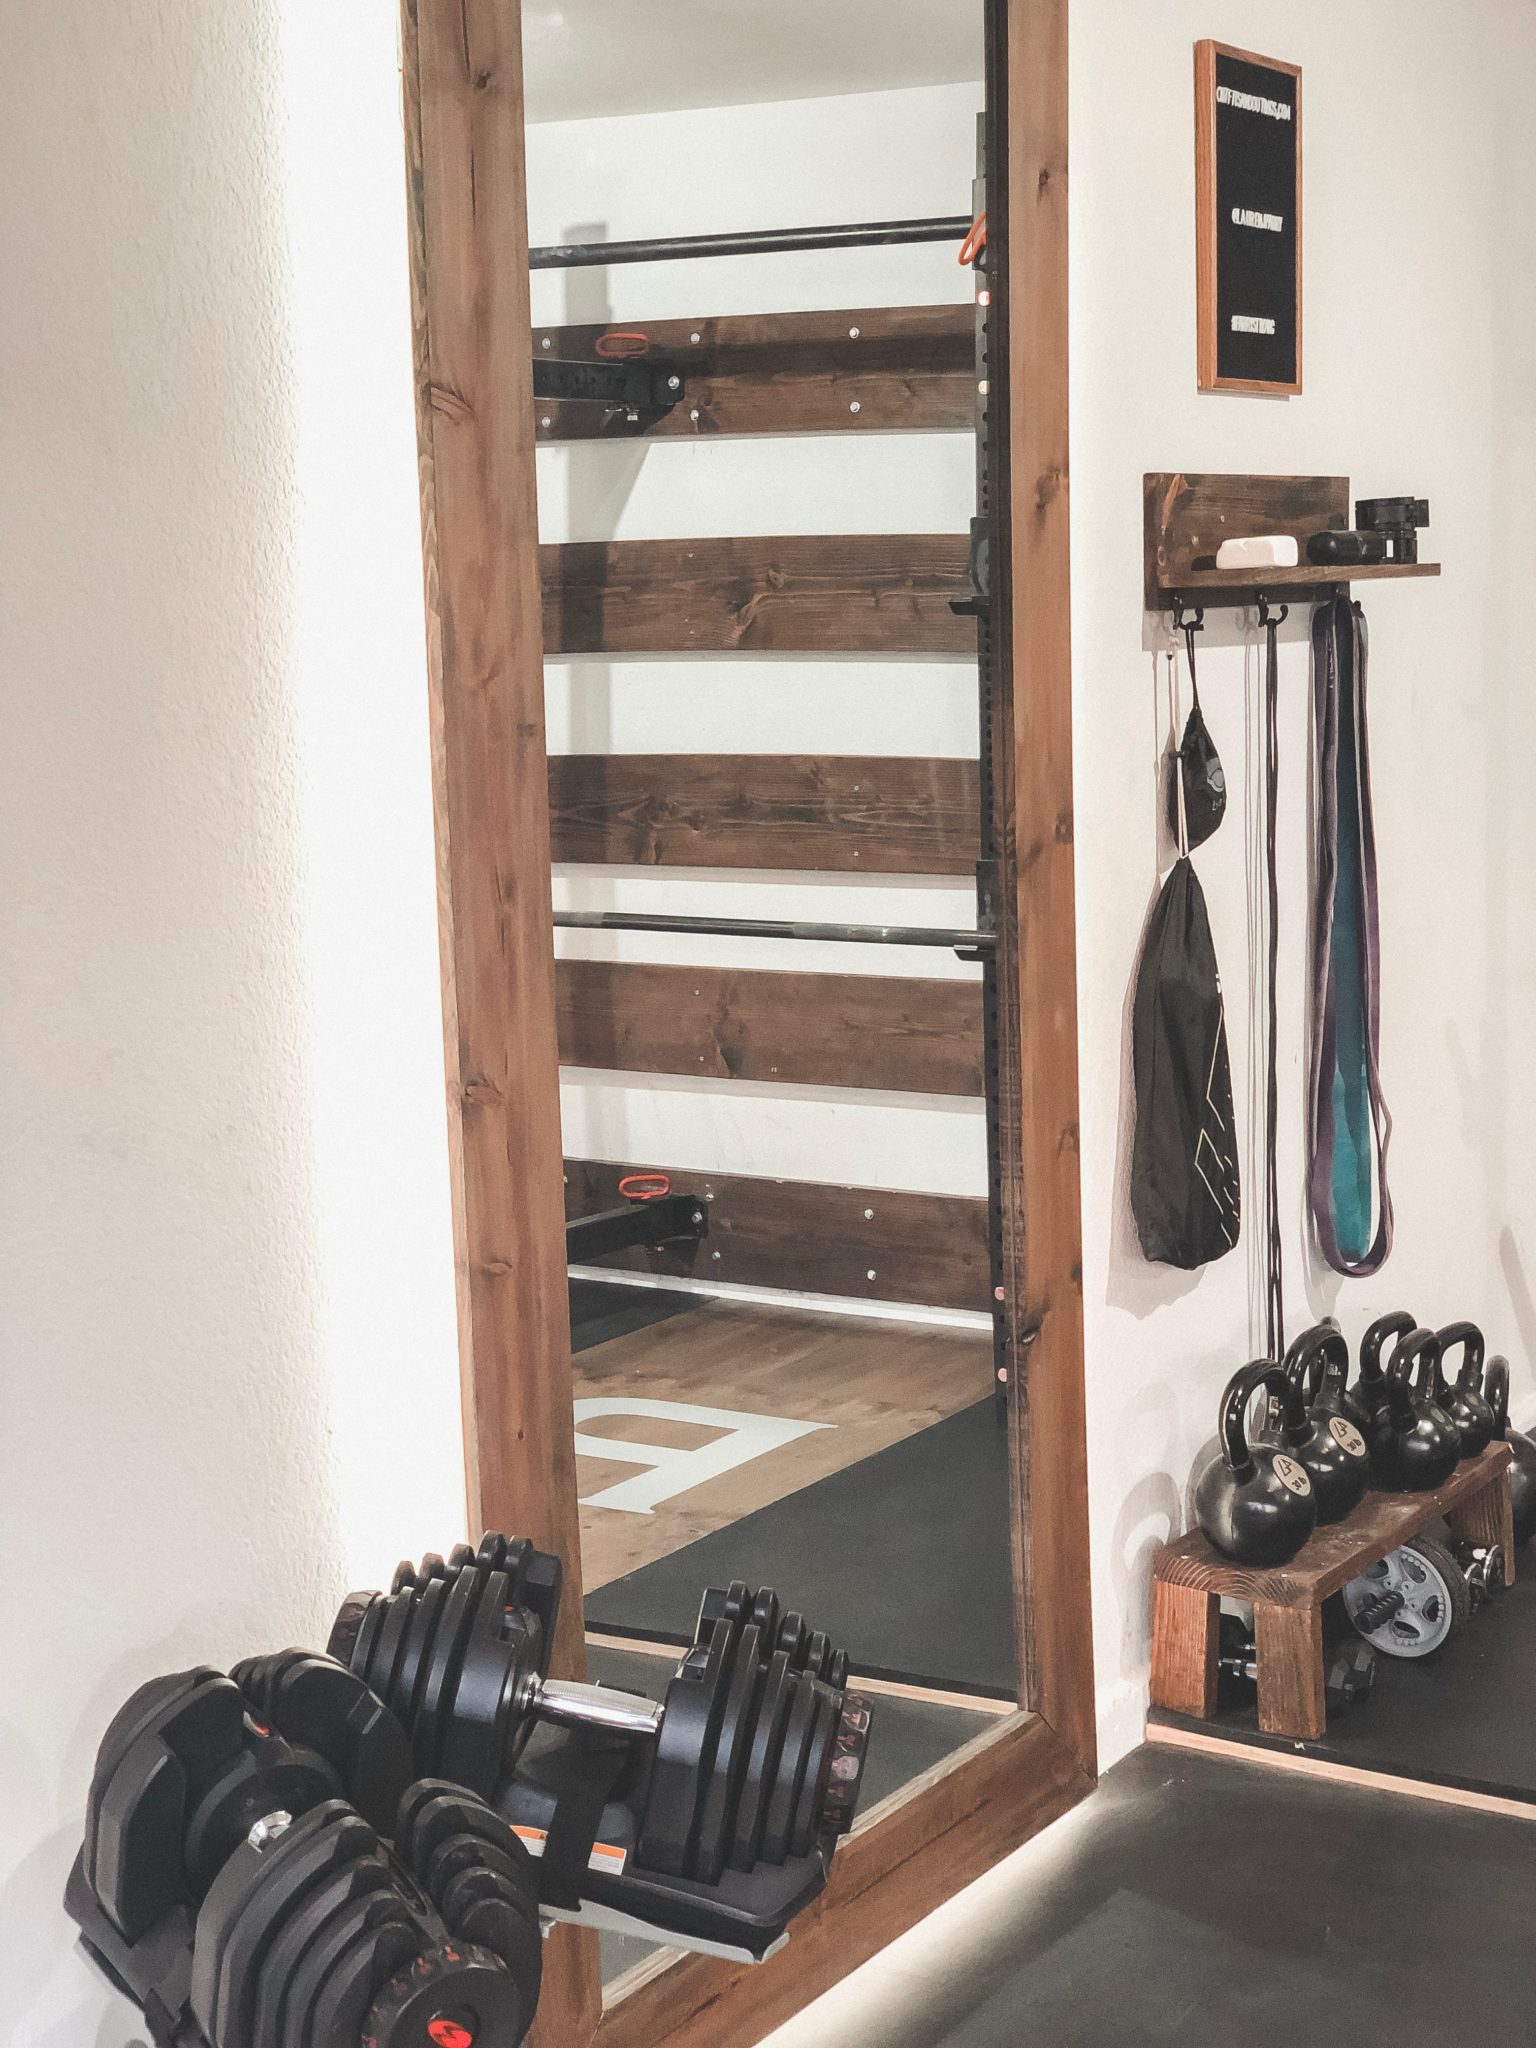 Garage Gym Ideas featured by top US lifestyle blog, Outfits & Outings